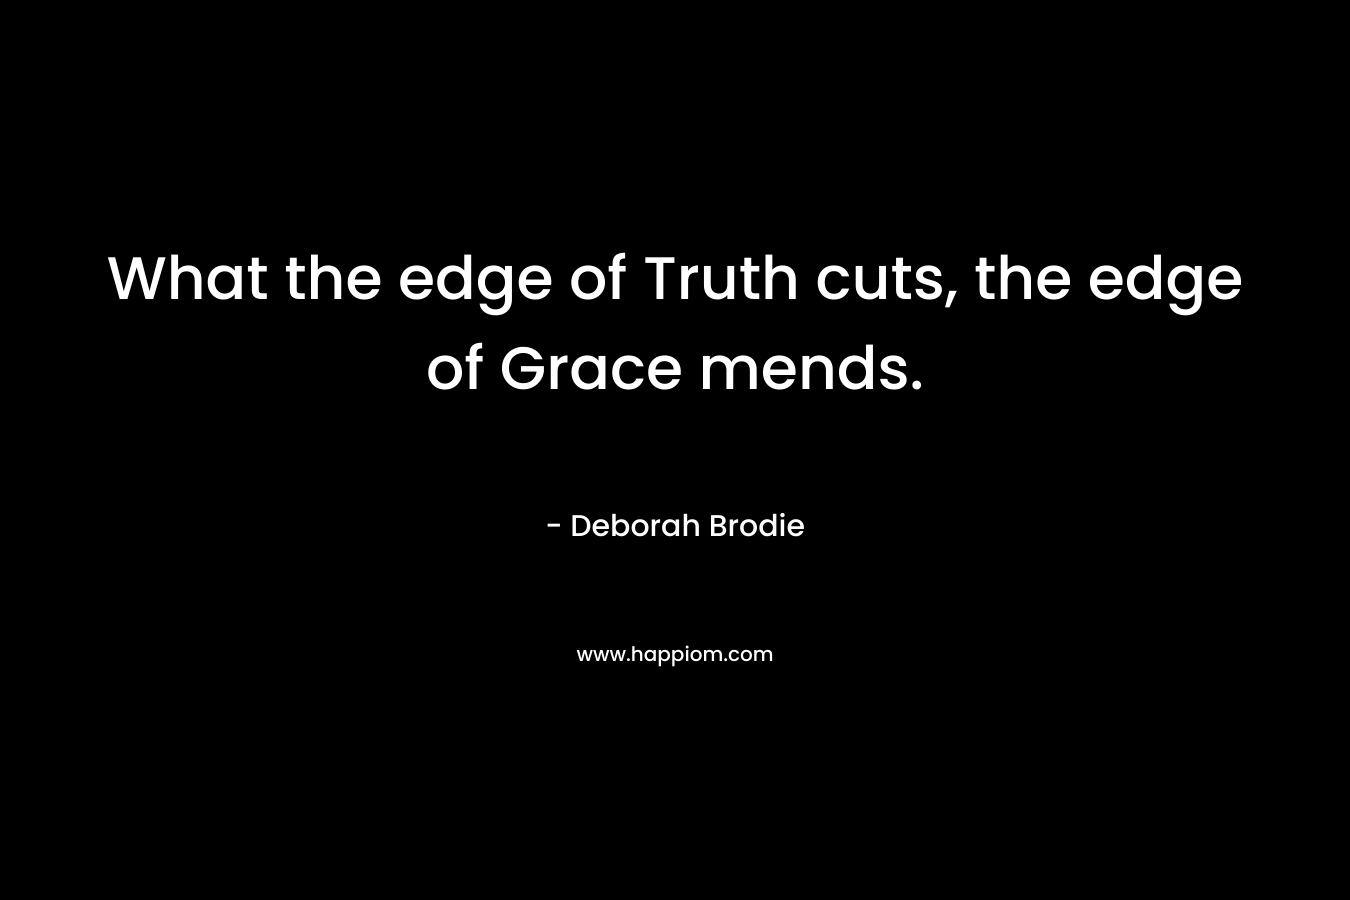 What the edge of Truth cuts, the edge of Grace mends.